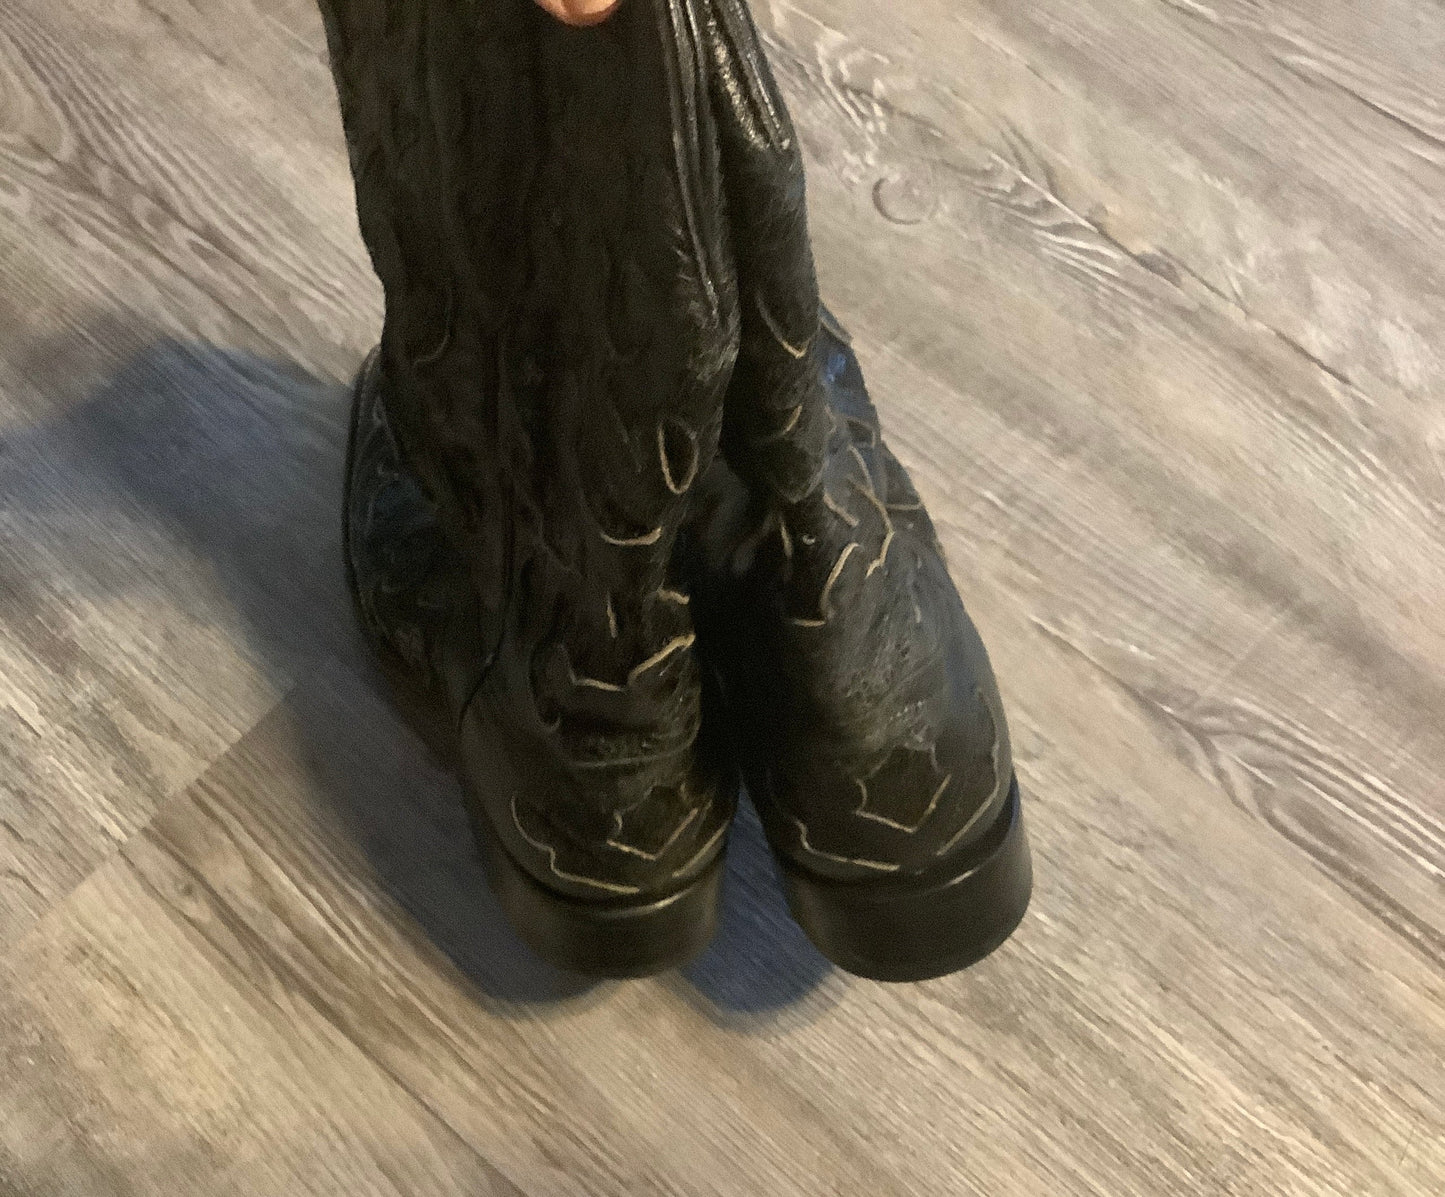 Black Boots Western Corral, Size 9.5